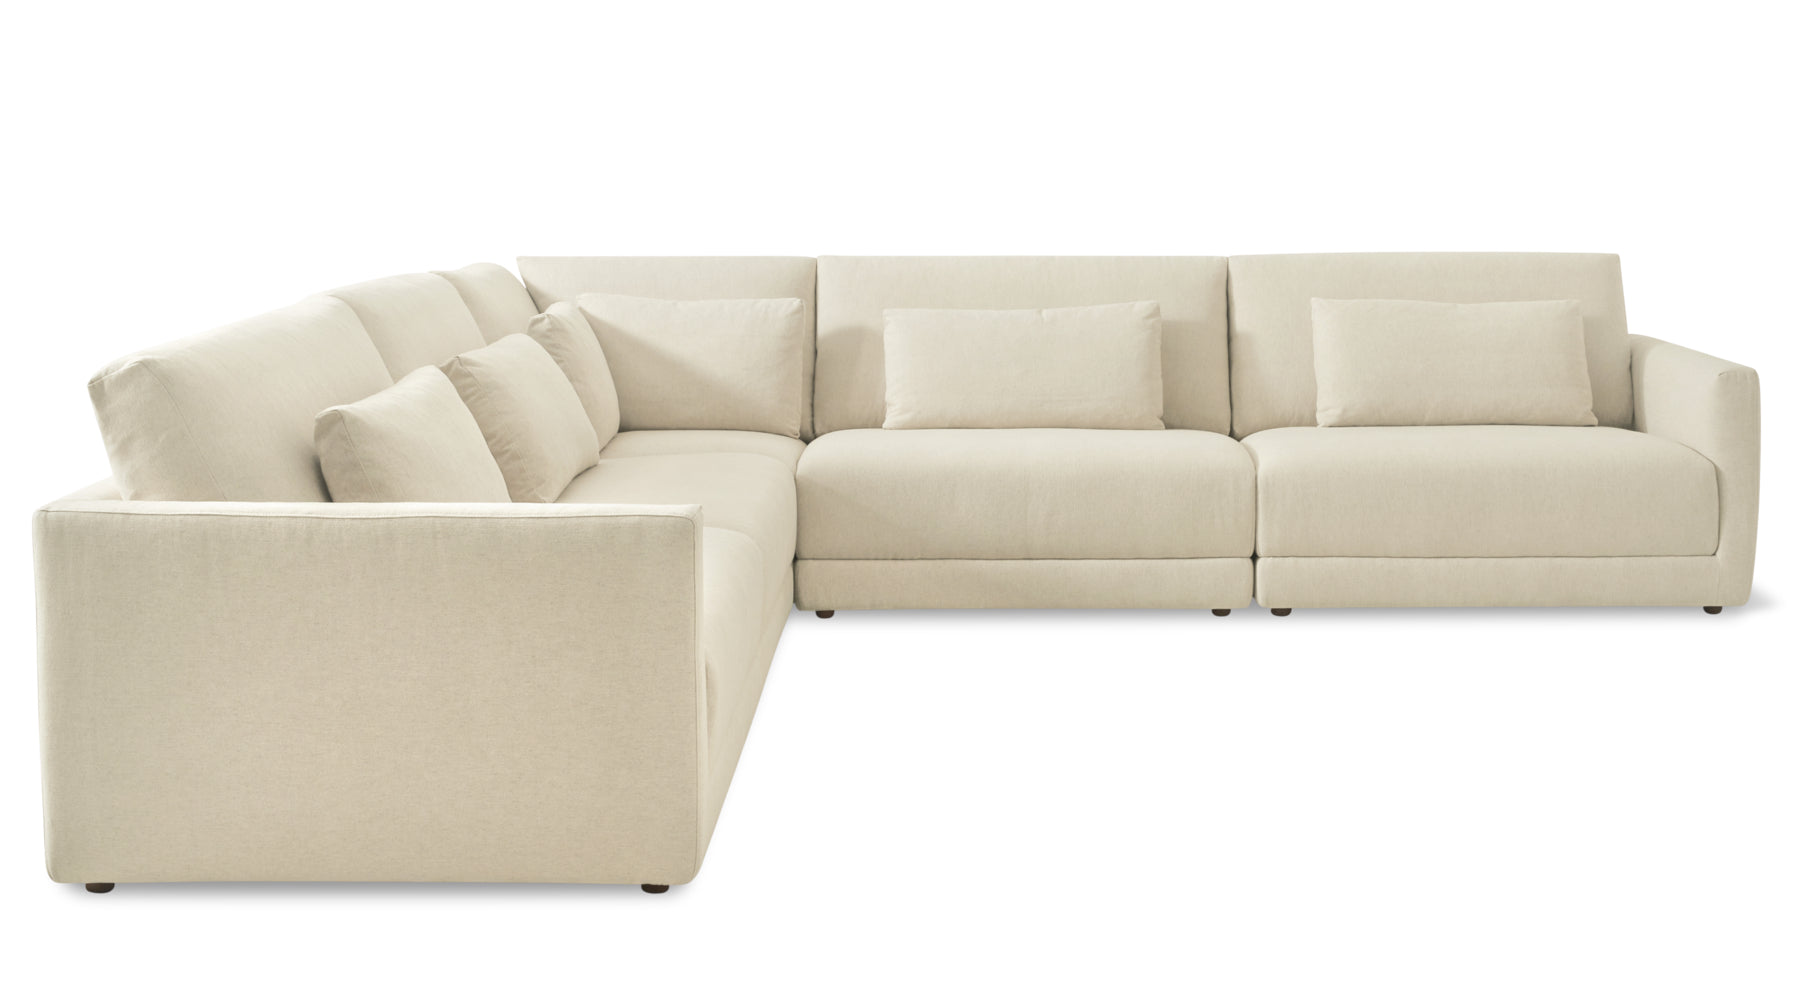 Wind Down 5-Piece Modular Sectional Closed, Beach - Image 4